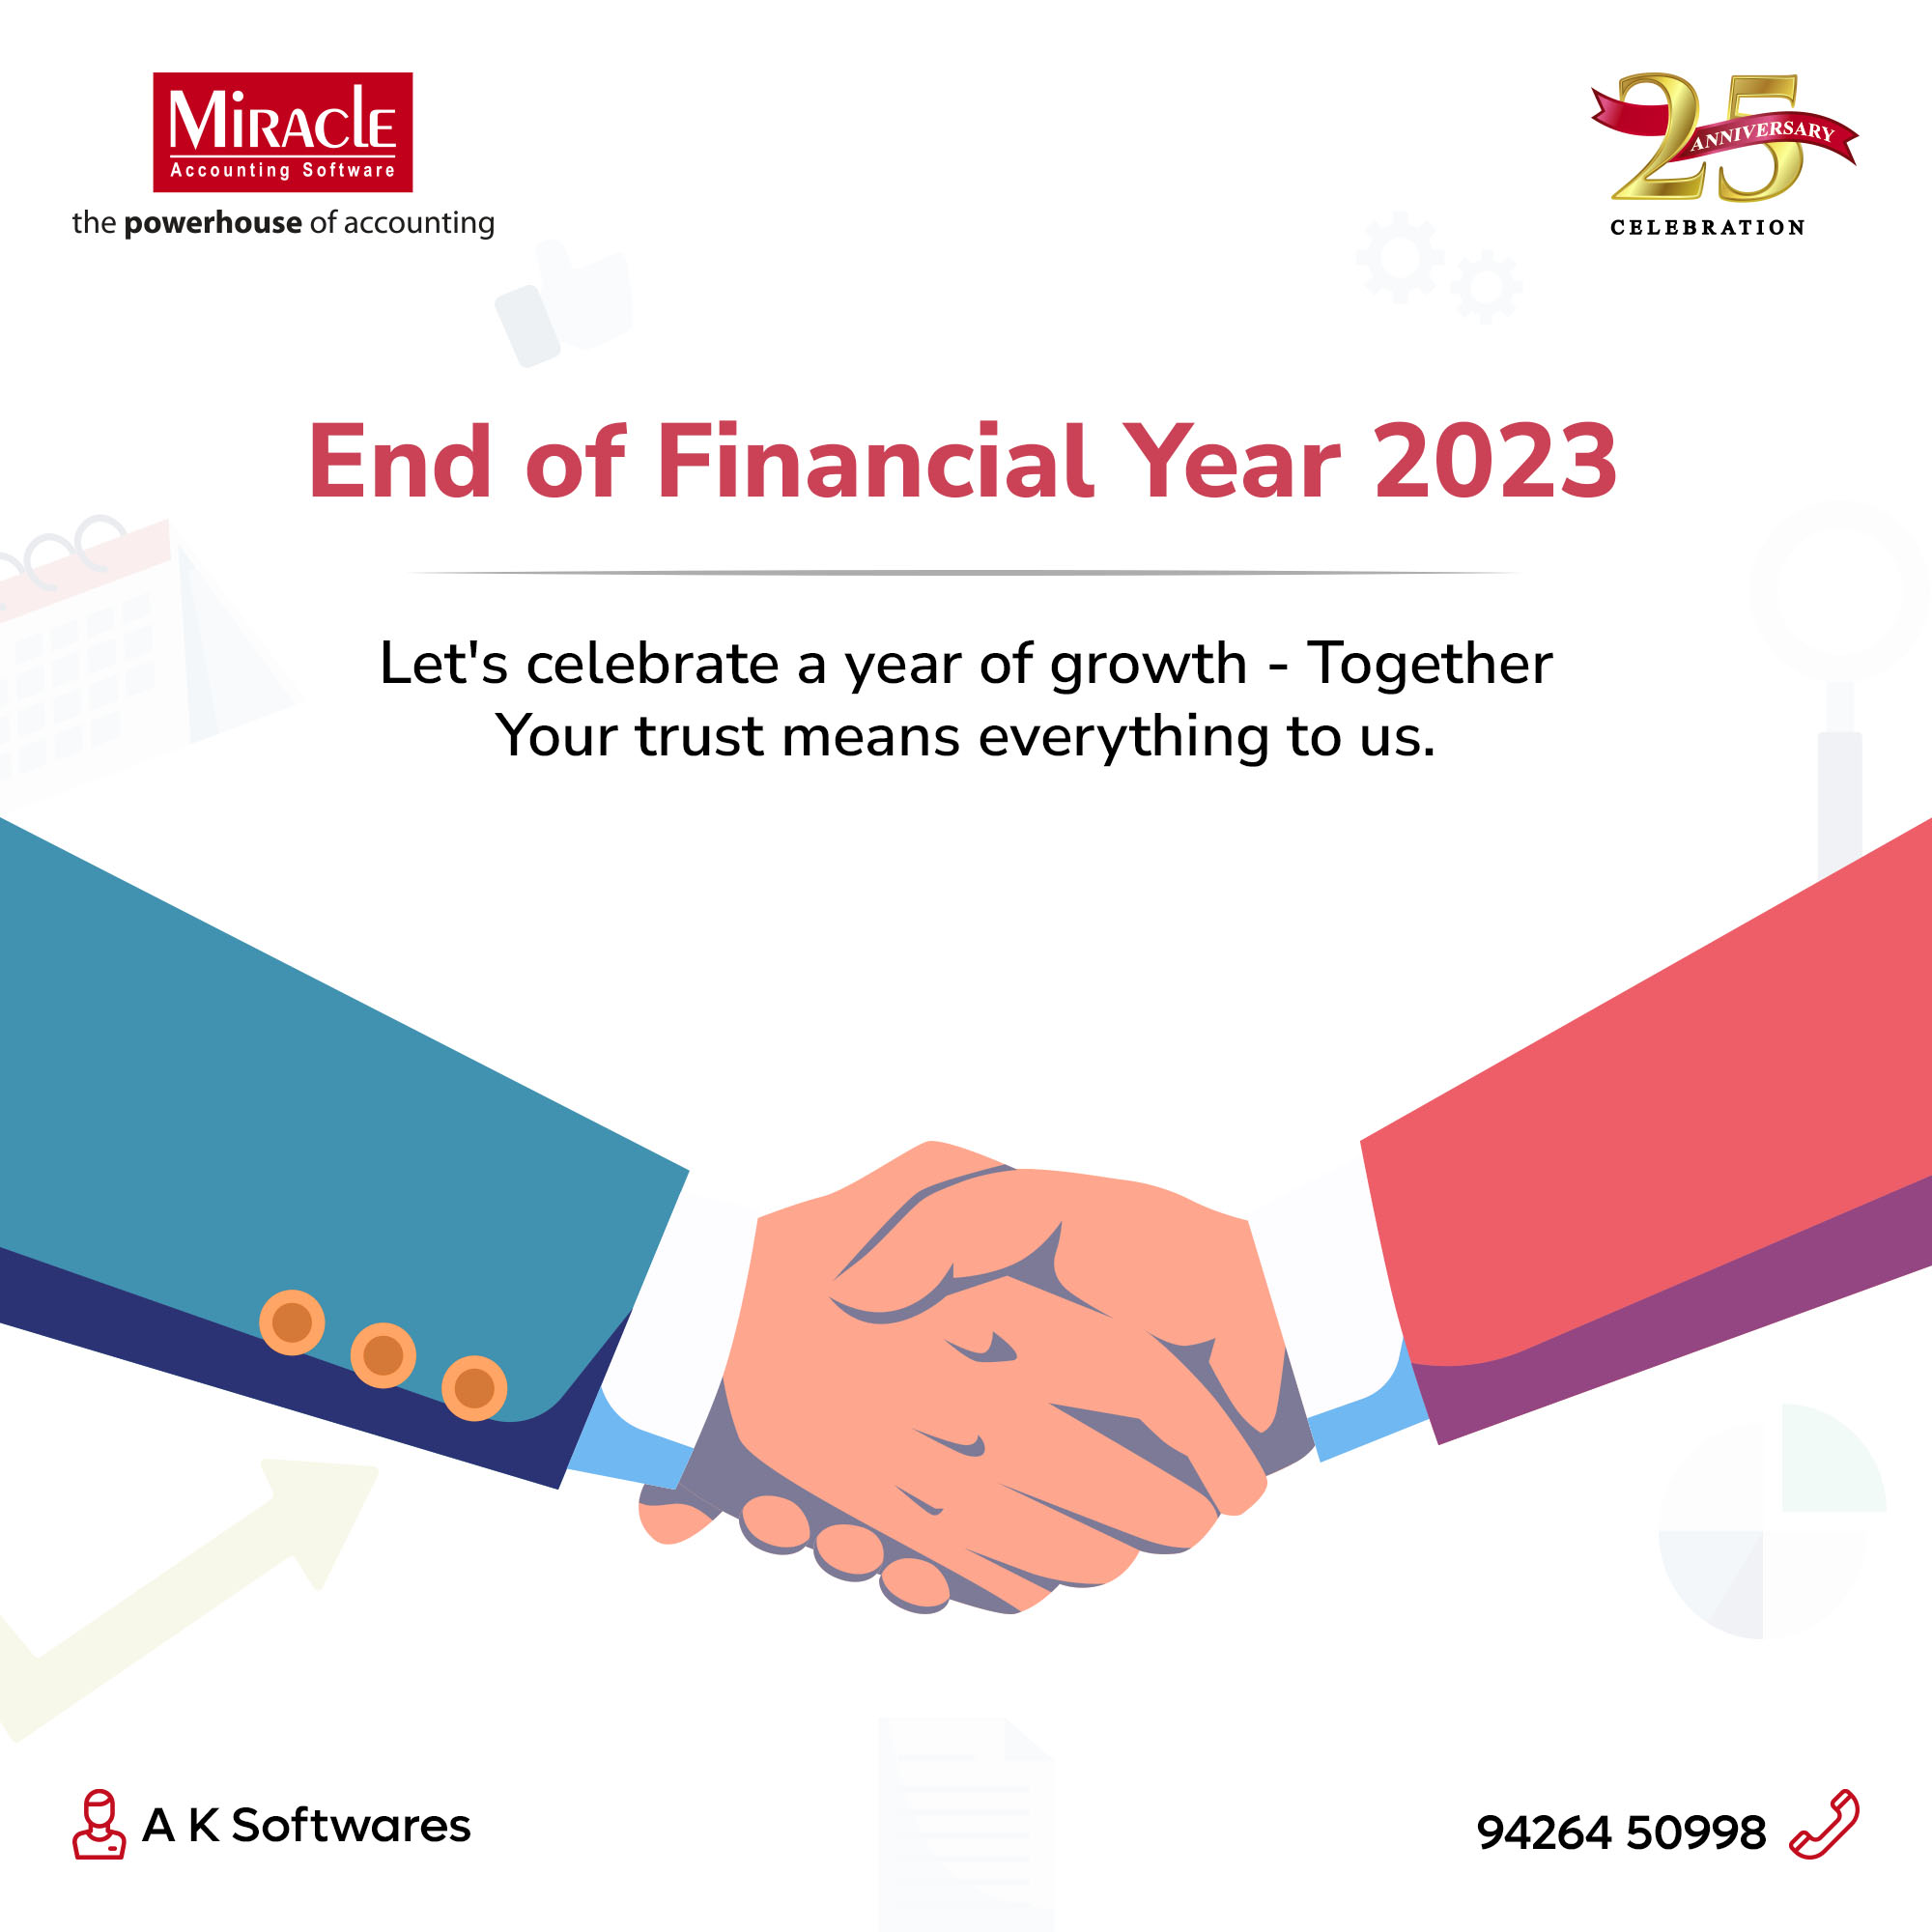 new year opening process in miracle software